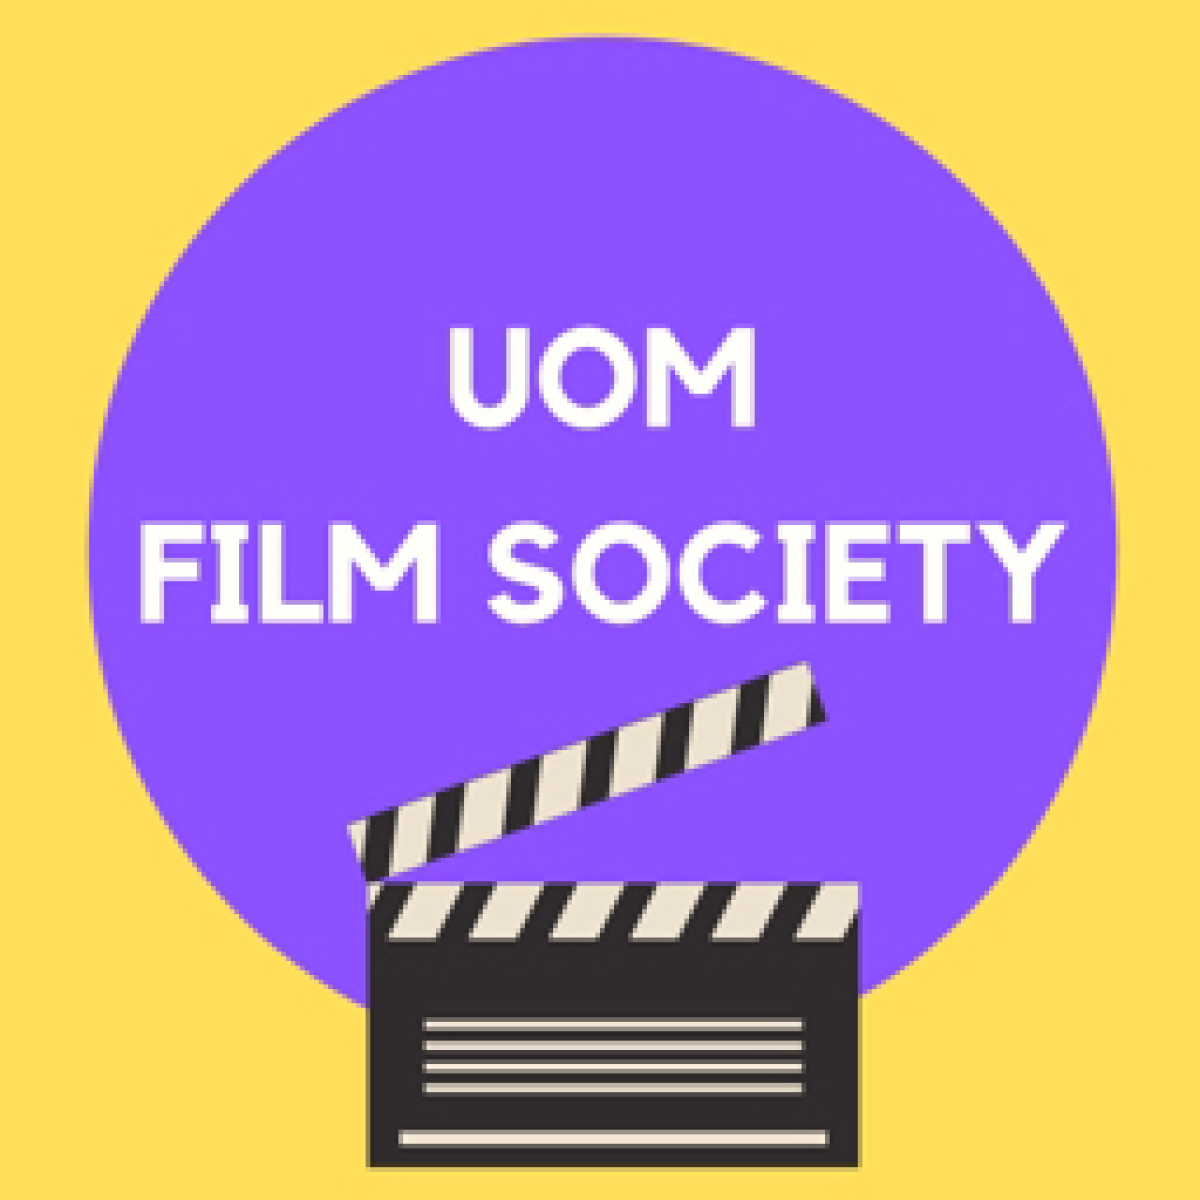 An evening with UoM Film Society and Chungking Express